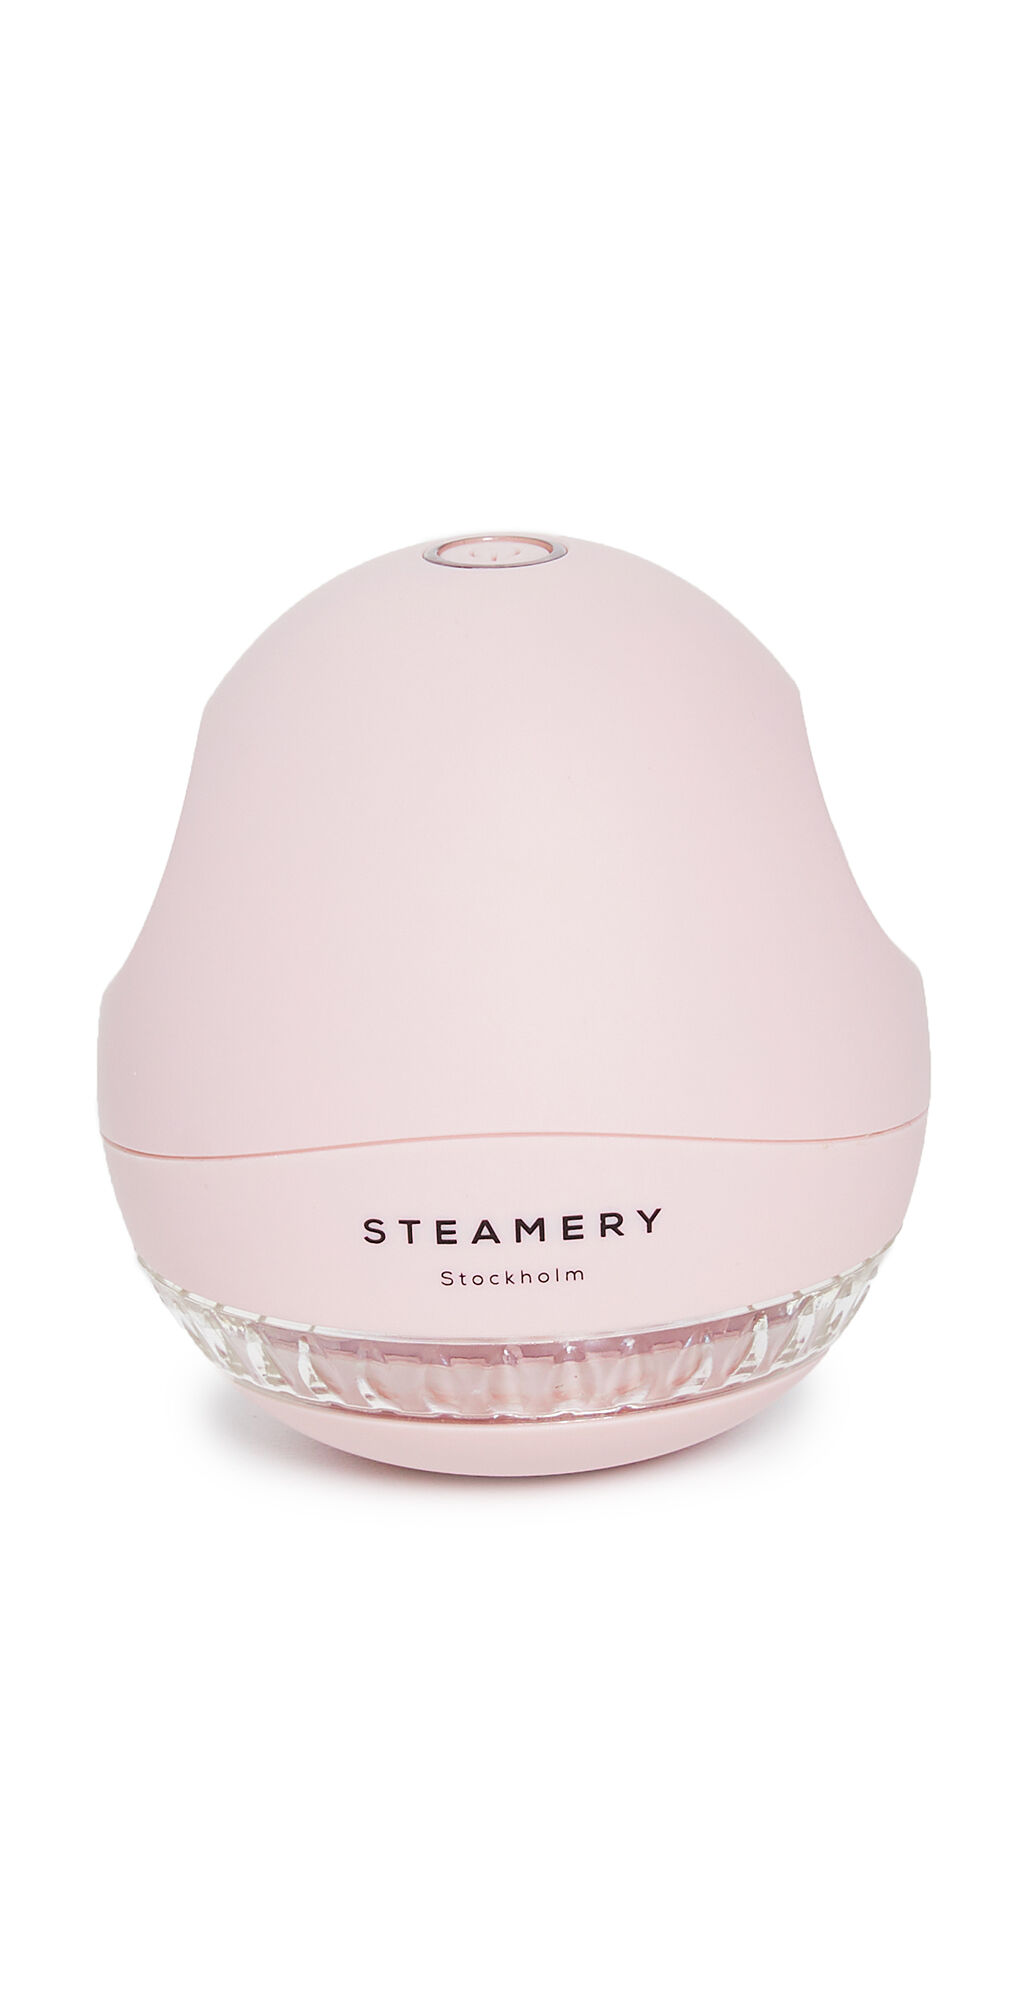 Shopbop Home Shopbop @Home Stockholm Steamery Fabric and Lint Shaver Pink One Size    size: